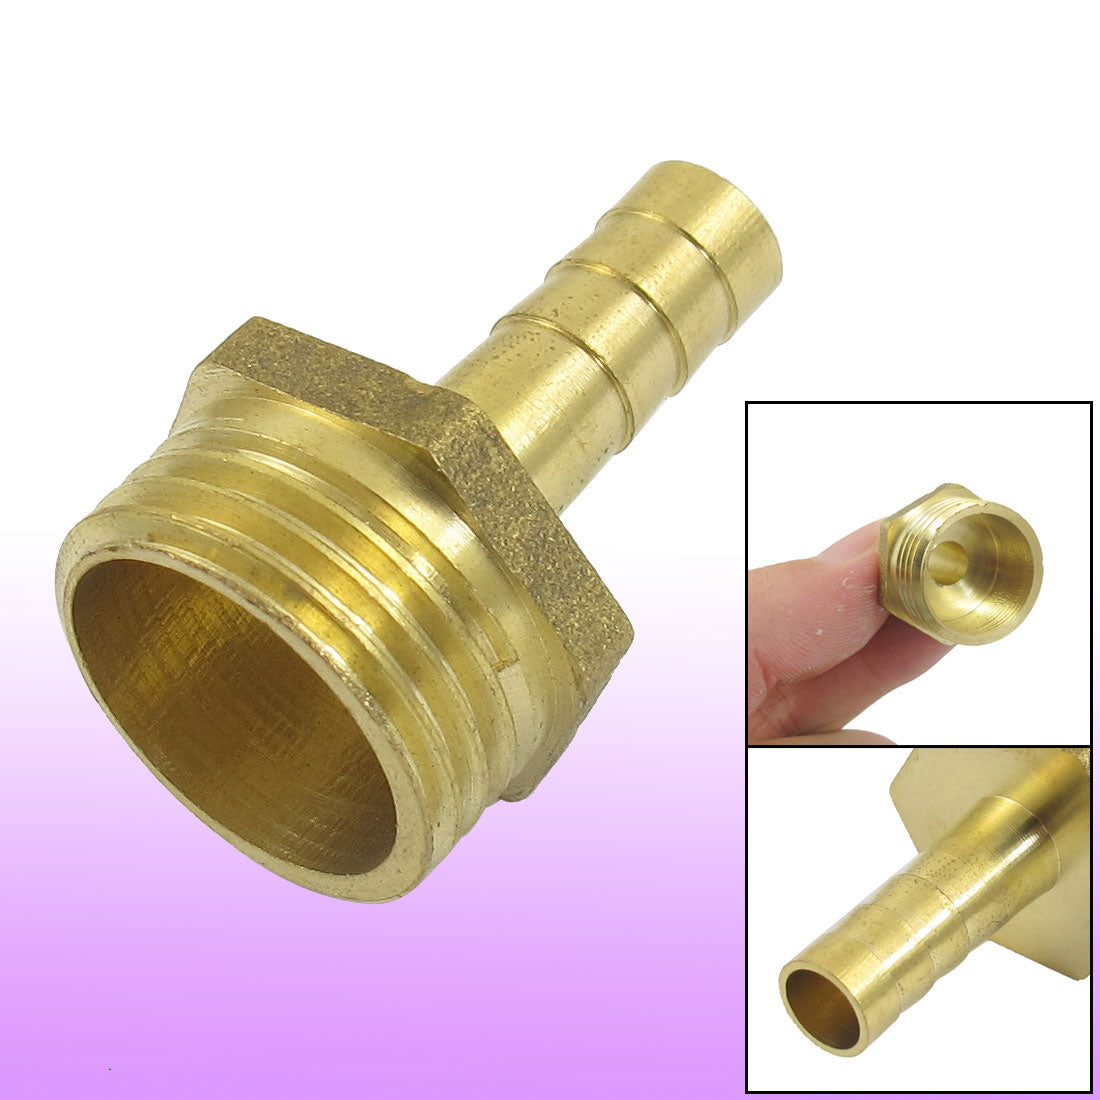 uxcell Uxcell Gold Tone Brass 8mm Fuel Gas Hose Barb 1/2"PT Male Thread Coupling Fitting